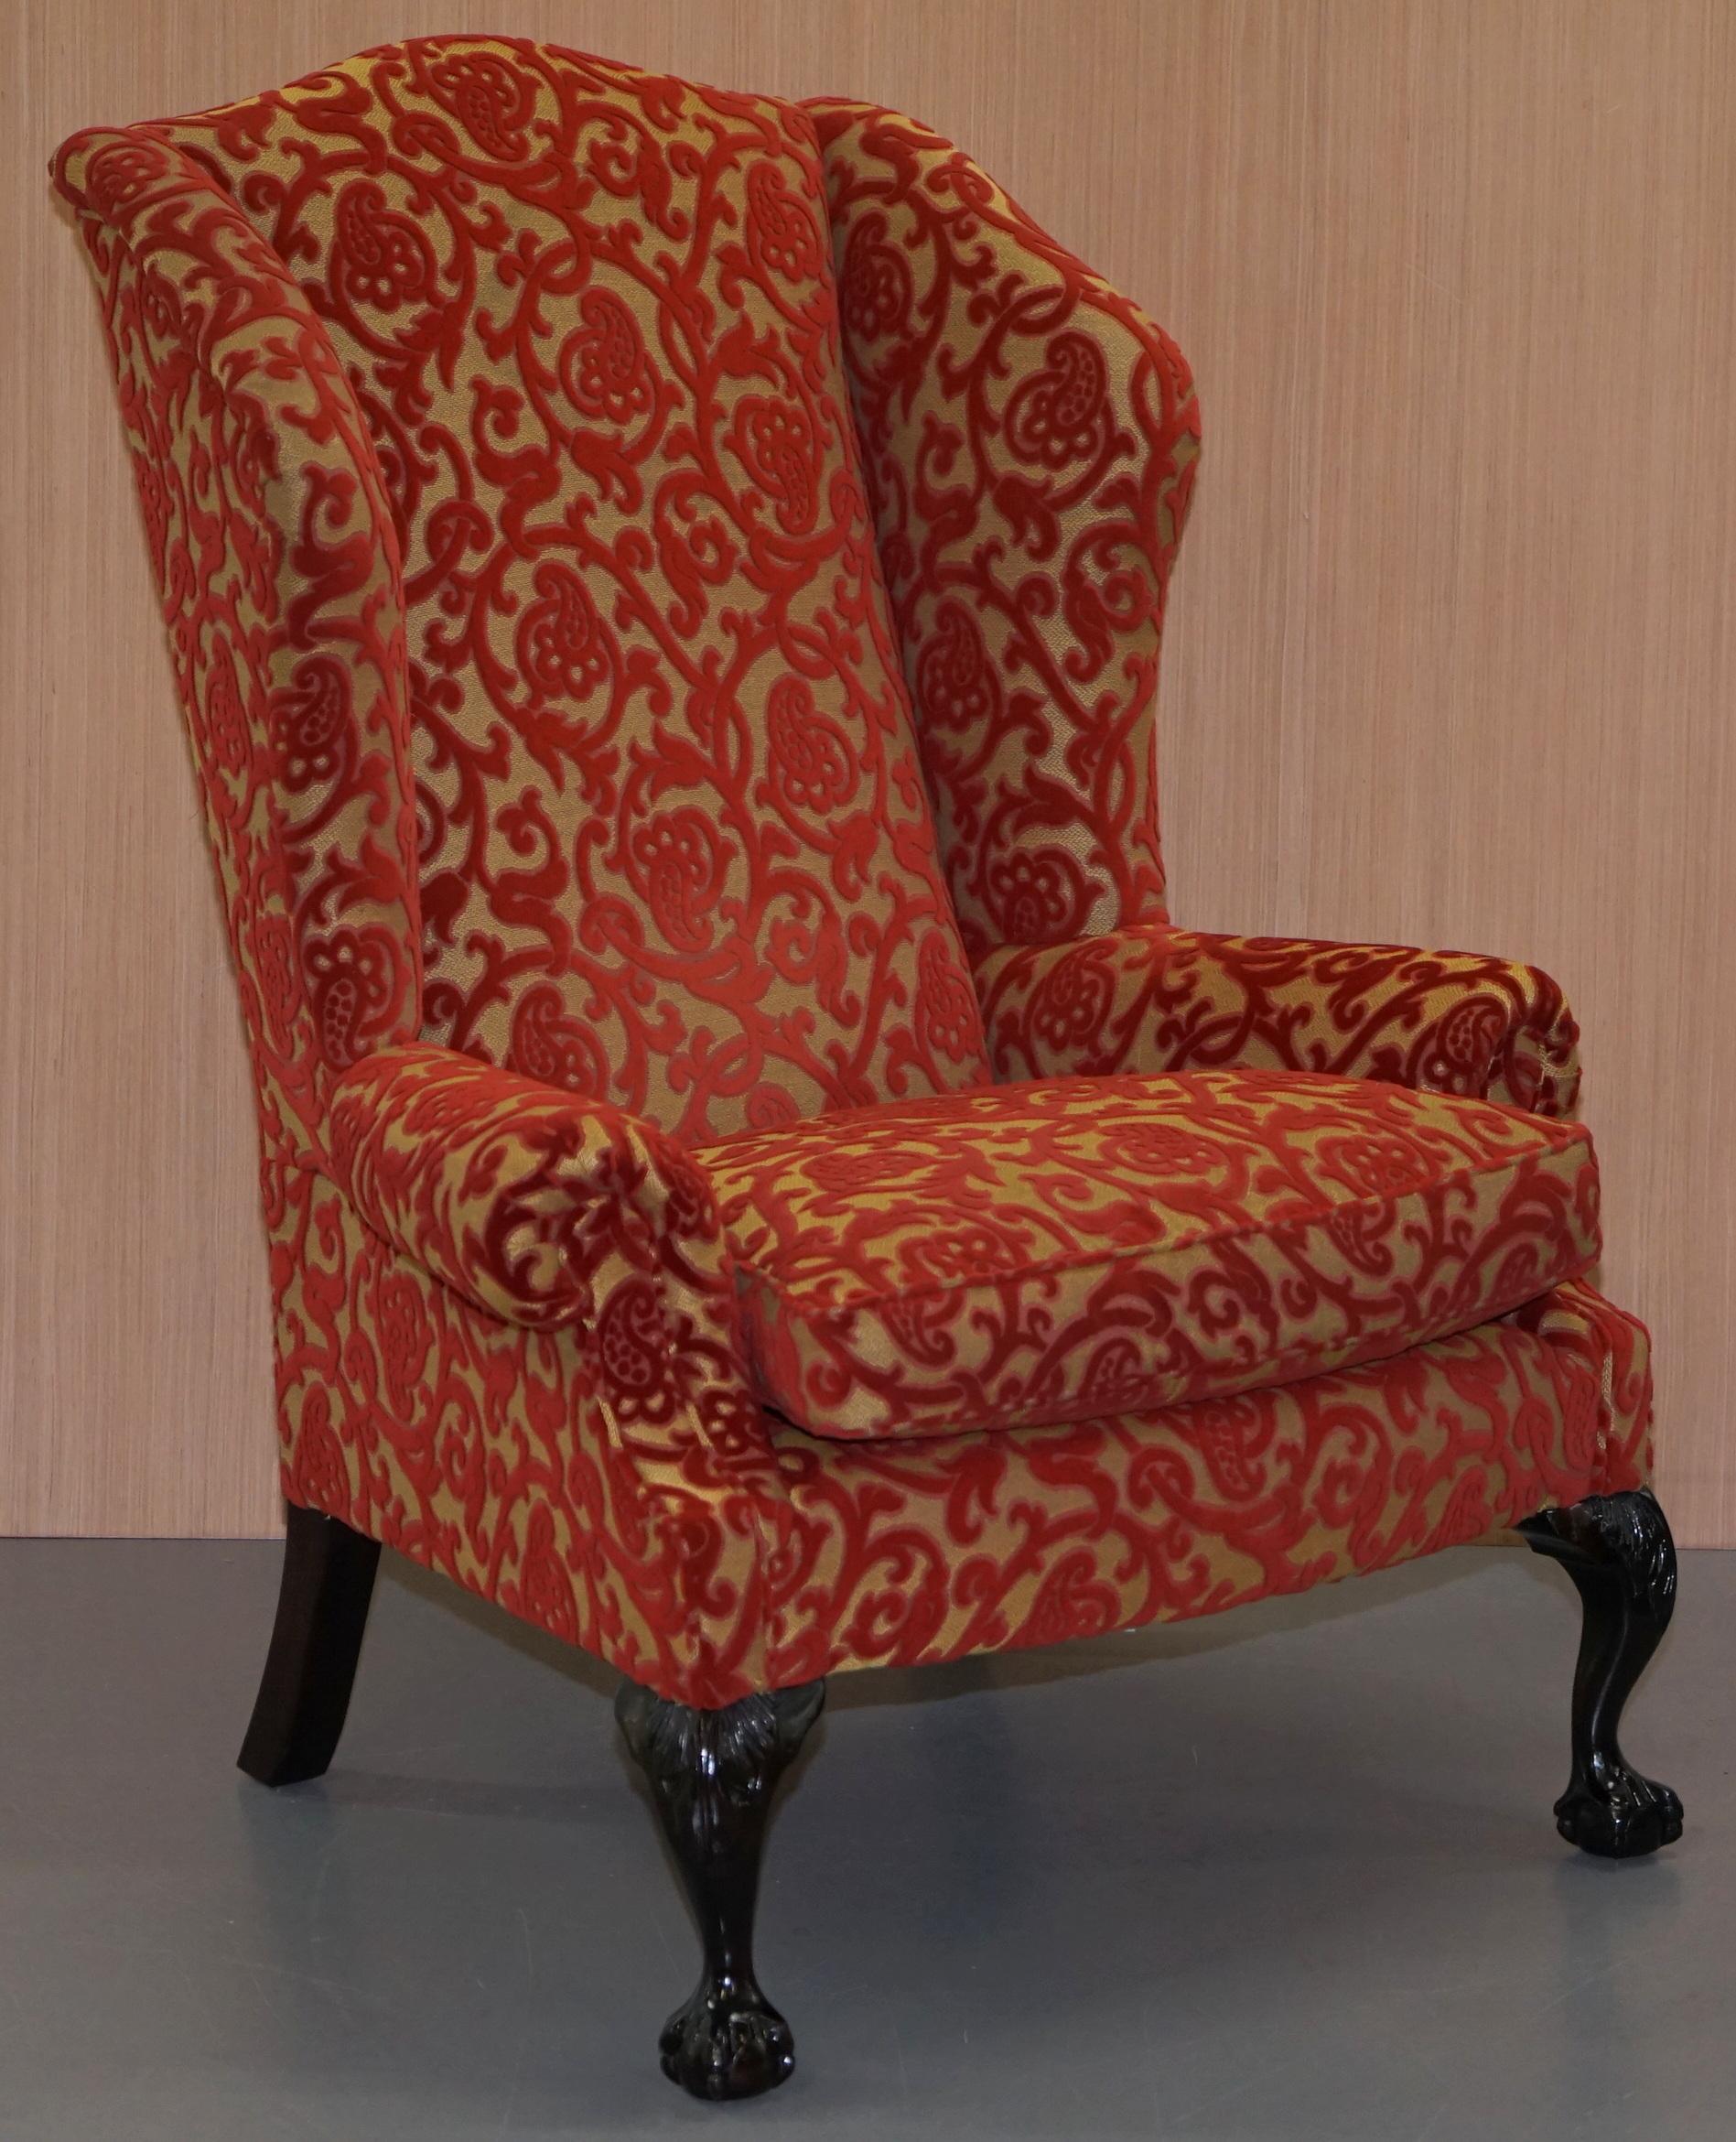 We are delighted to offer for sale this lovely pair of RRP £9,378 George Smith Low Scroll Arm wingback armchairs with Damask upholstery.

A very good looking well made and comfortable pair of large wingback armchairs by the great George Smith,